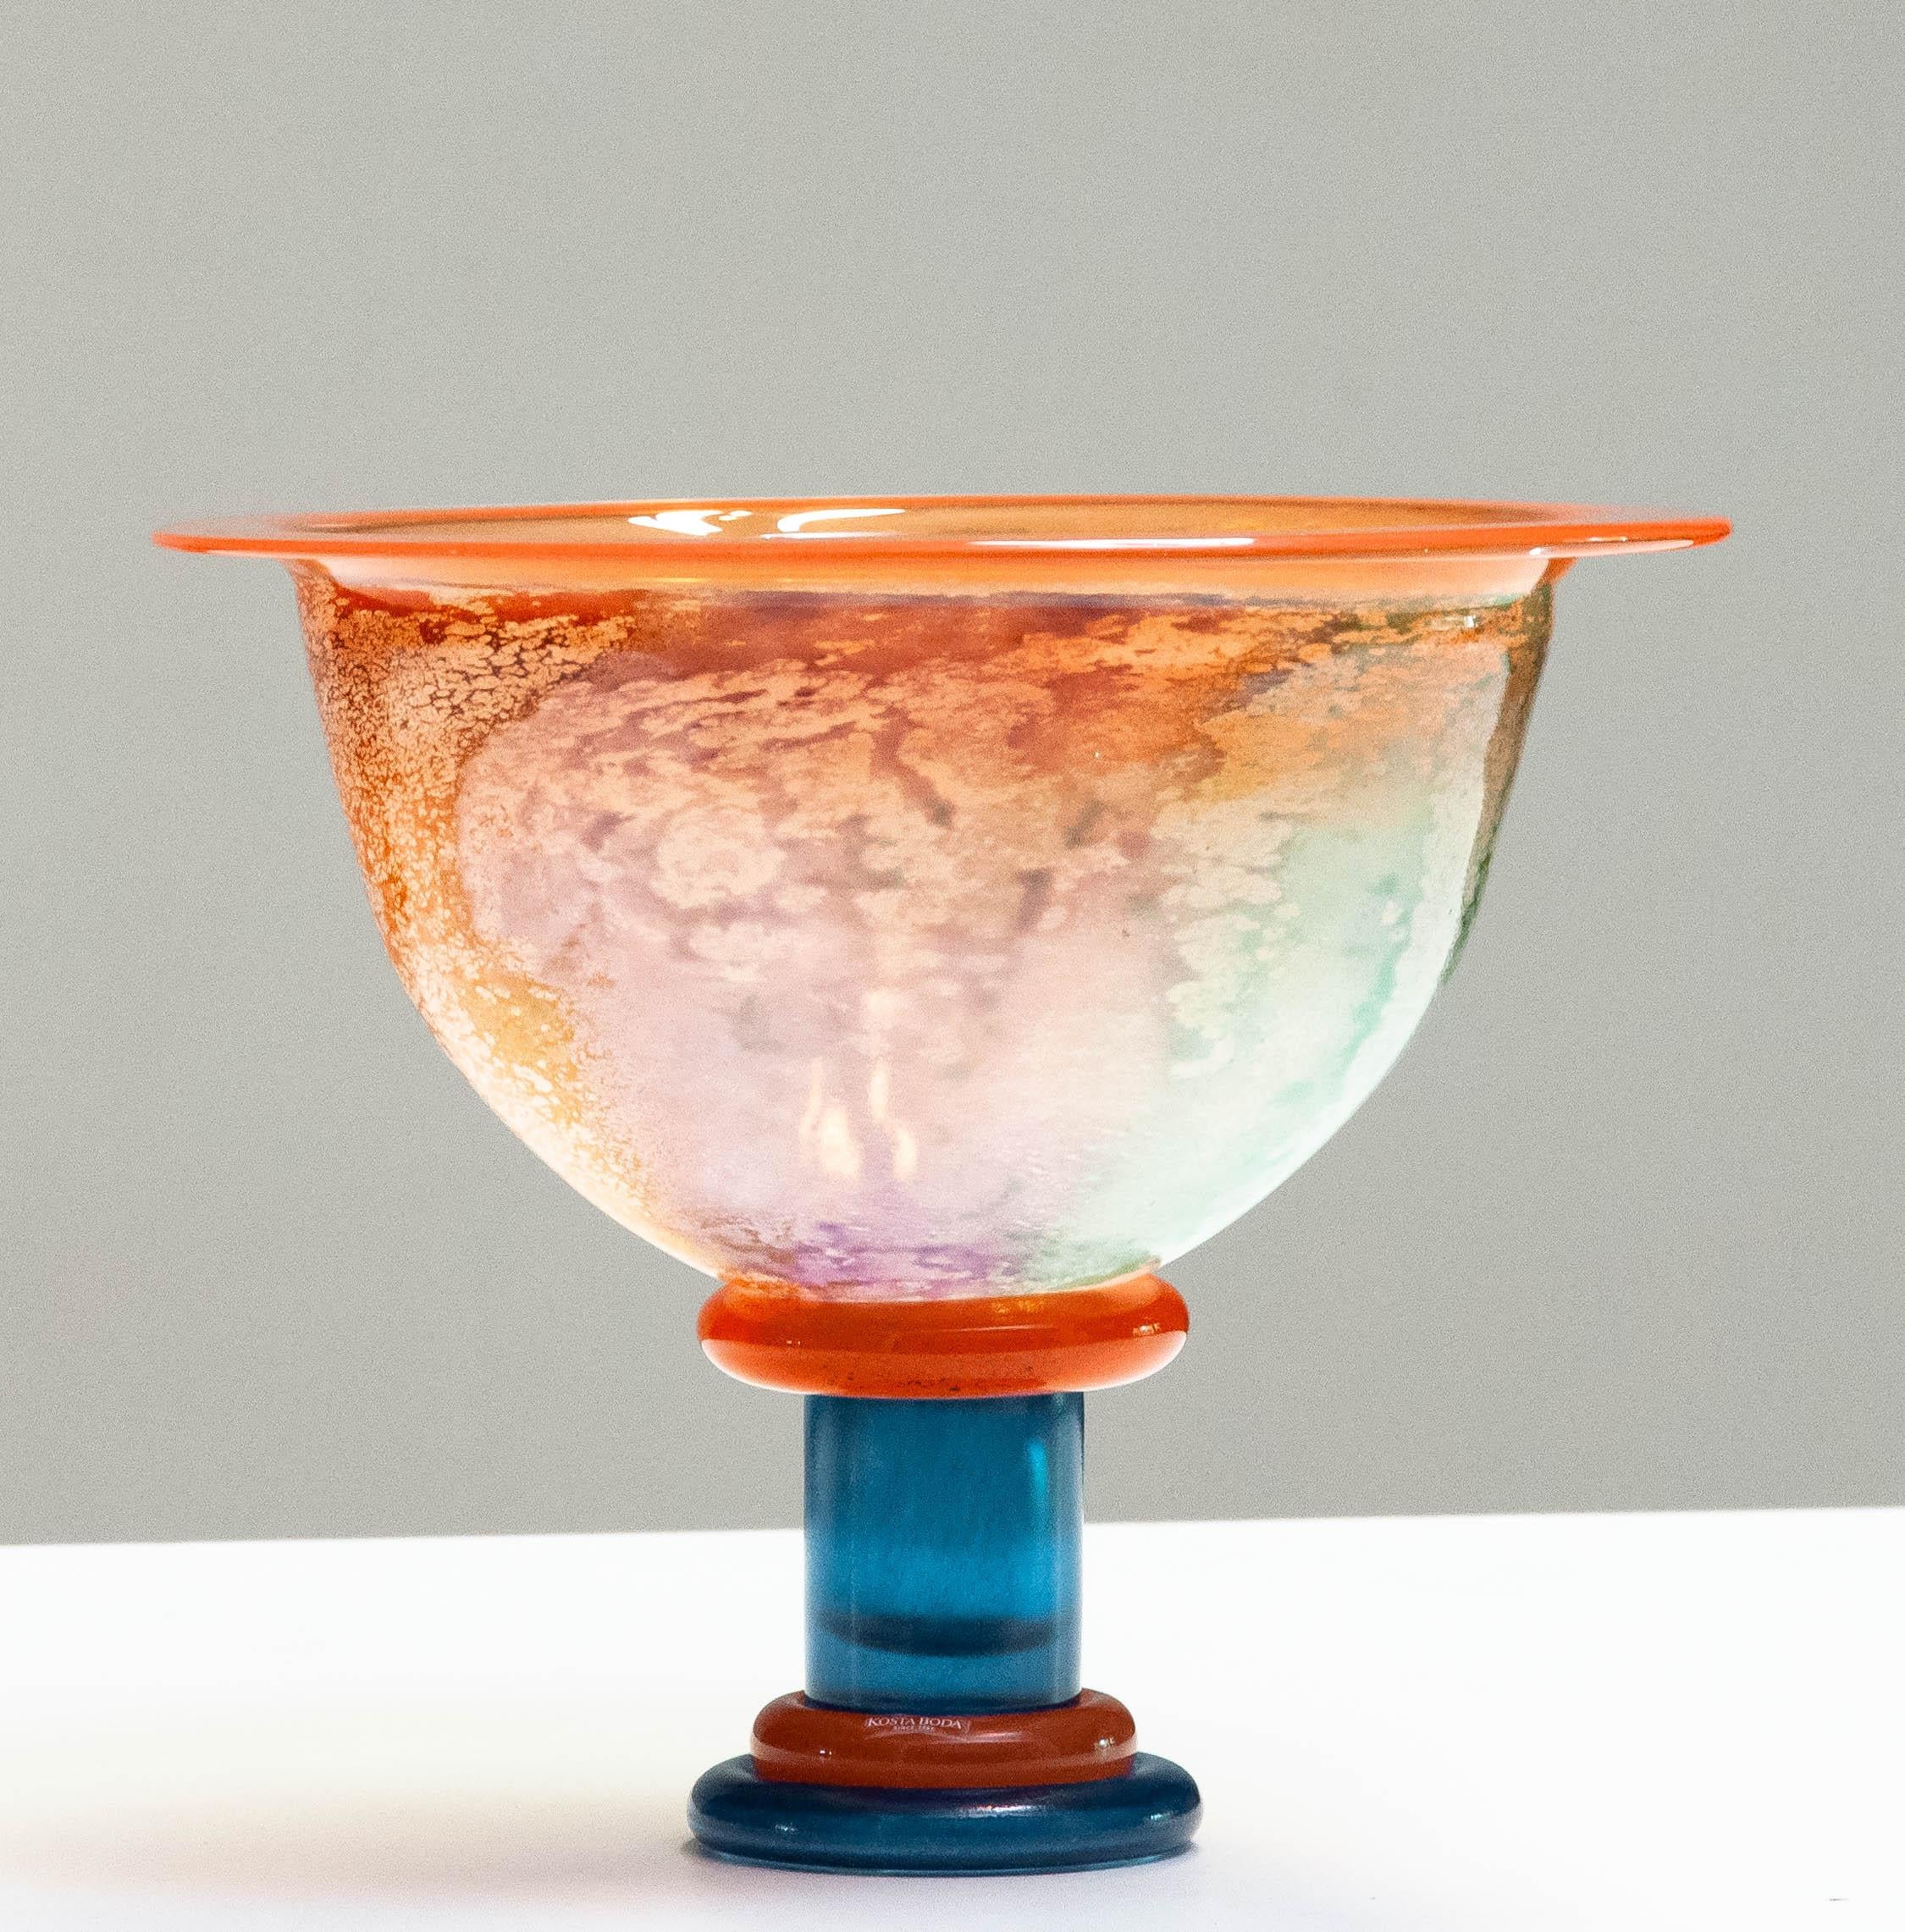 Beautiful large melange art glass in orange and blue bowl designed by Kjell Engman for Kosta Boda in the 1990's from the 'Cancan' series. Allover in very good condition.
The bowl is numbered and signed.